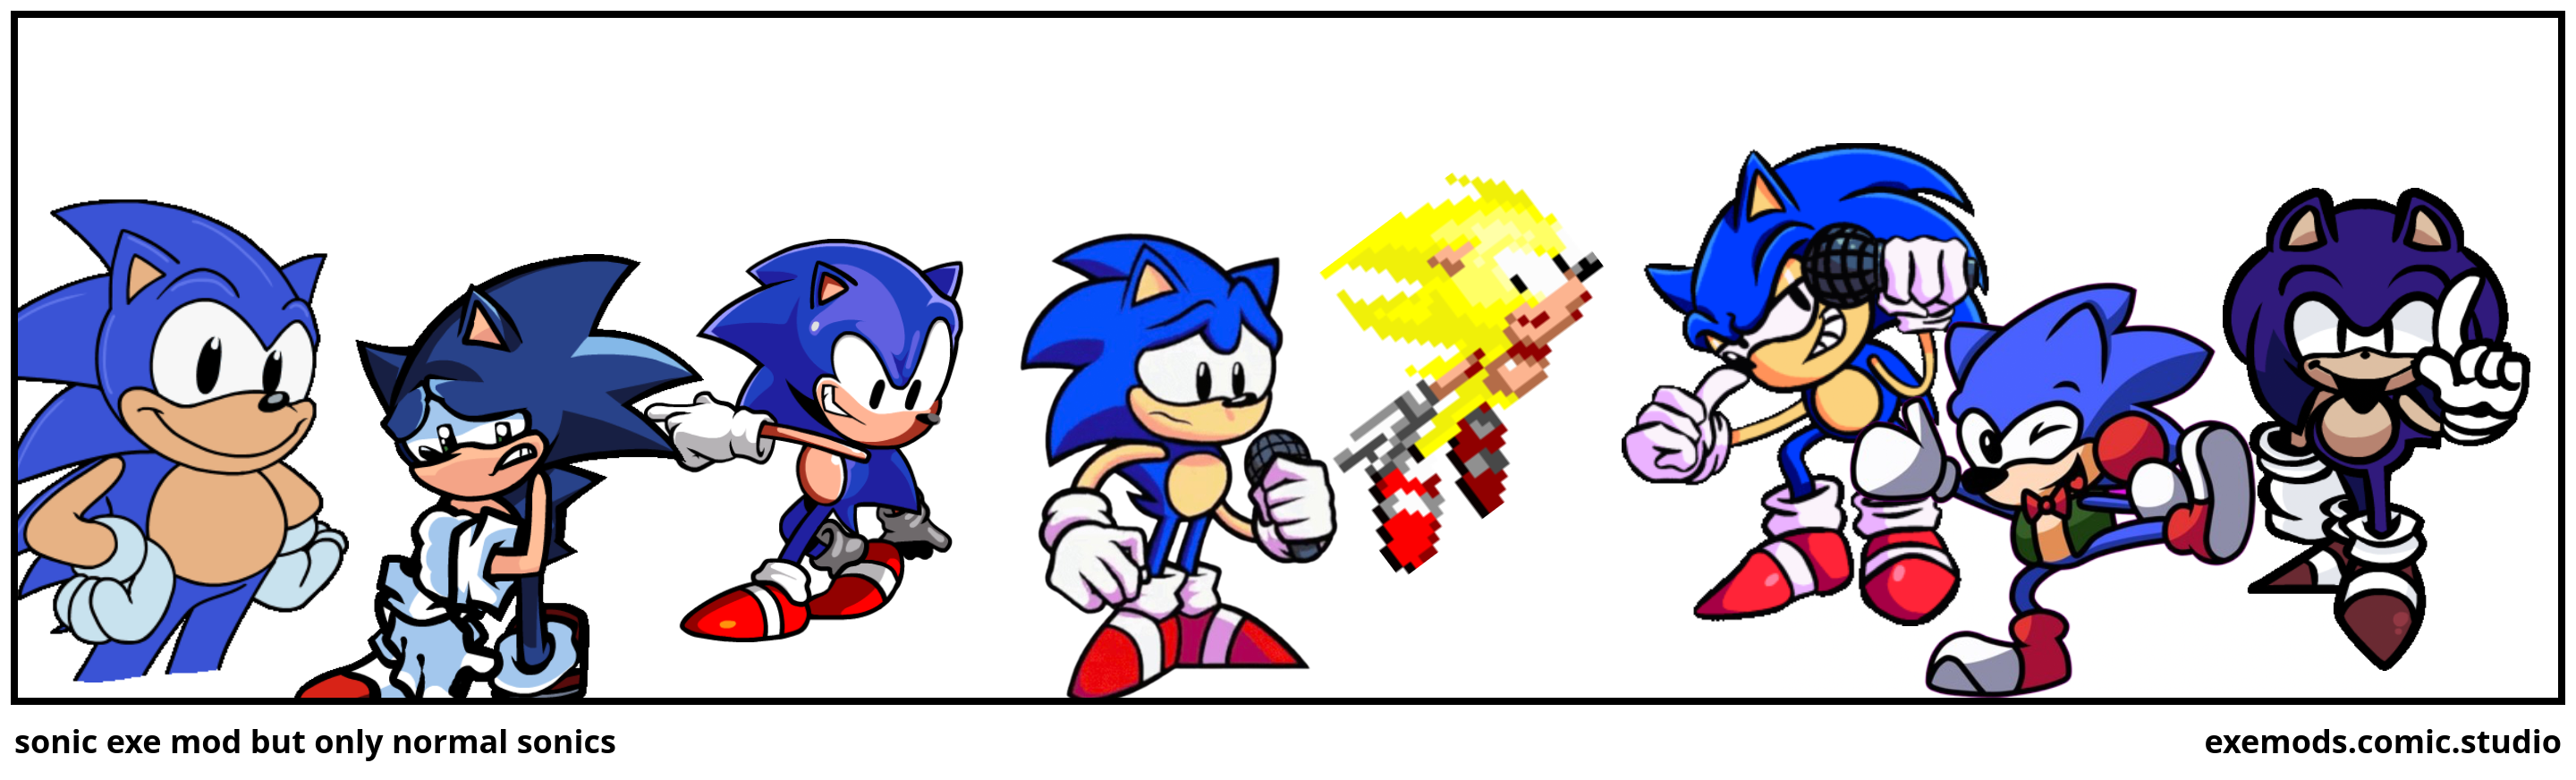 sonic exe mod but only normal sonics